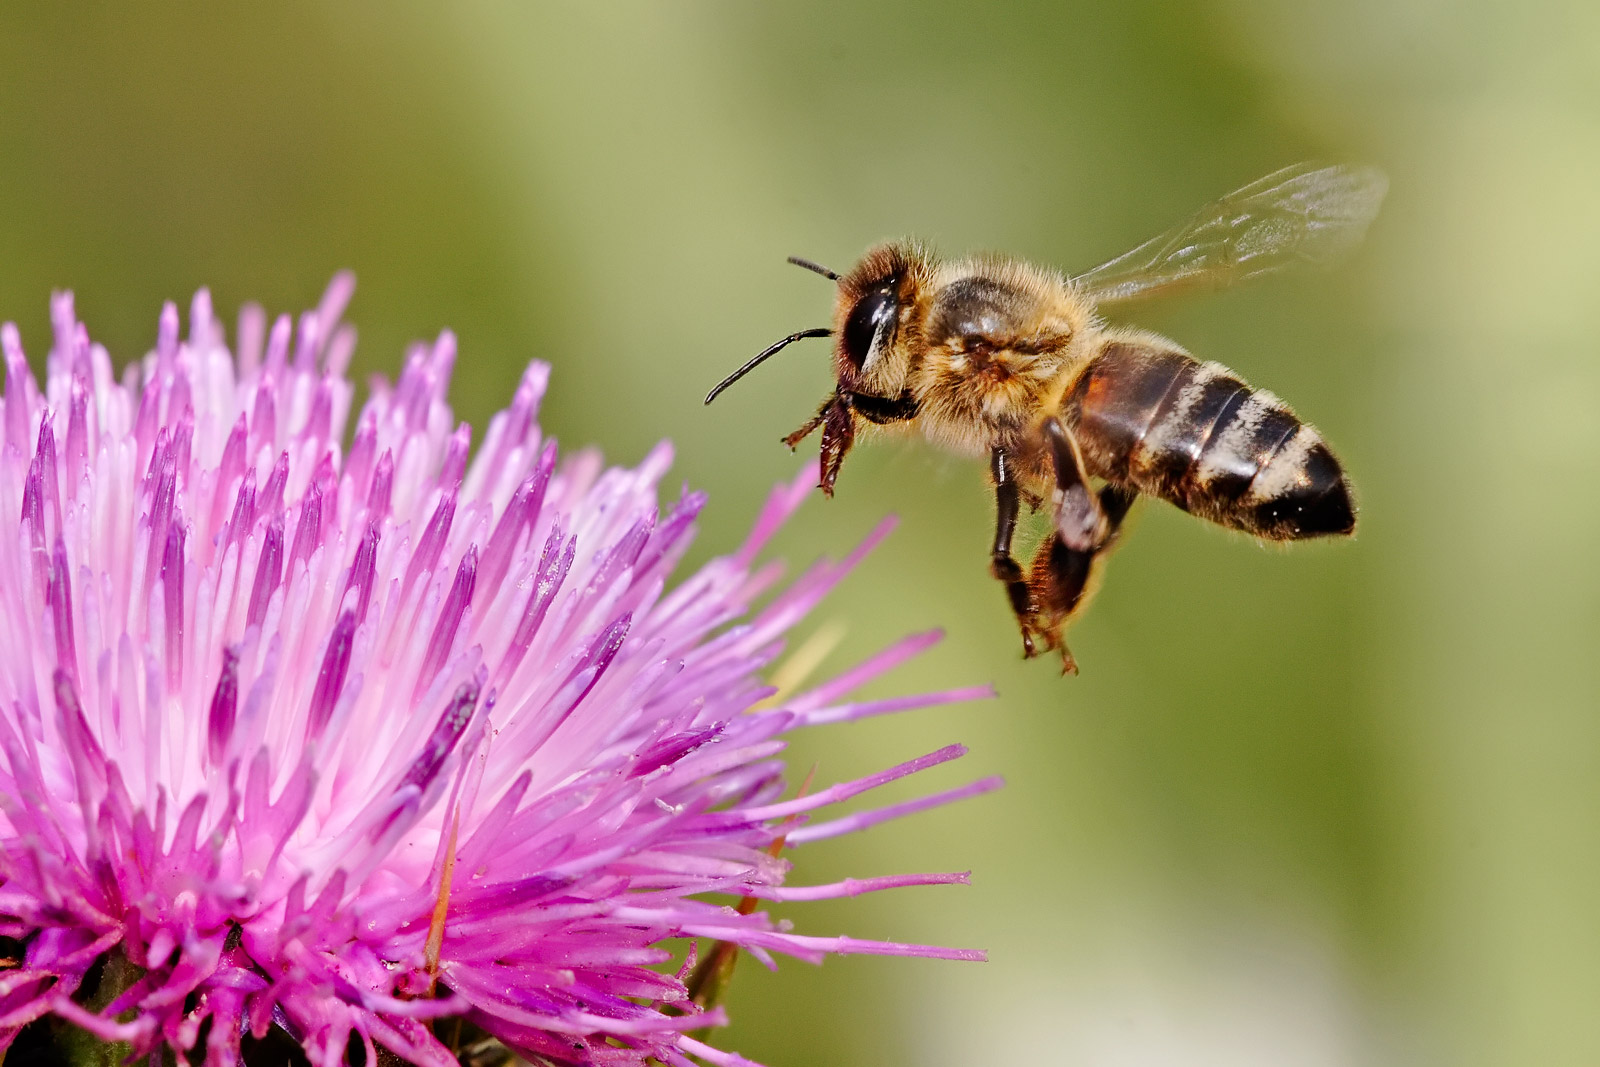 Do Bees Produce Value? A conversation between an ecological economist and a Marxist geographer